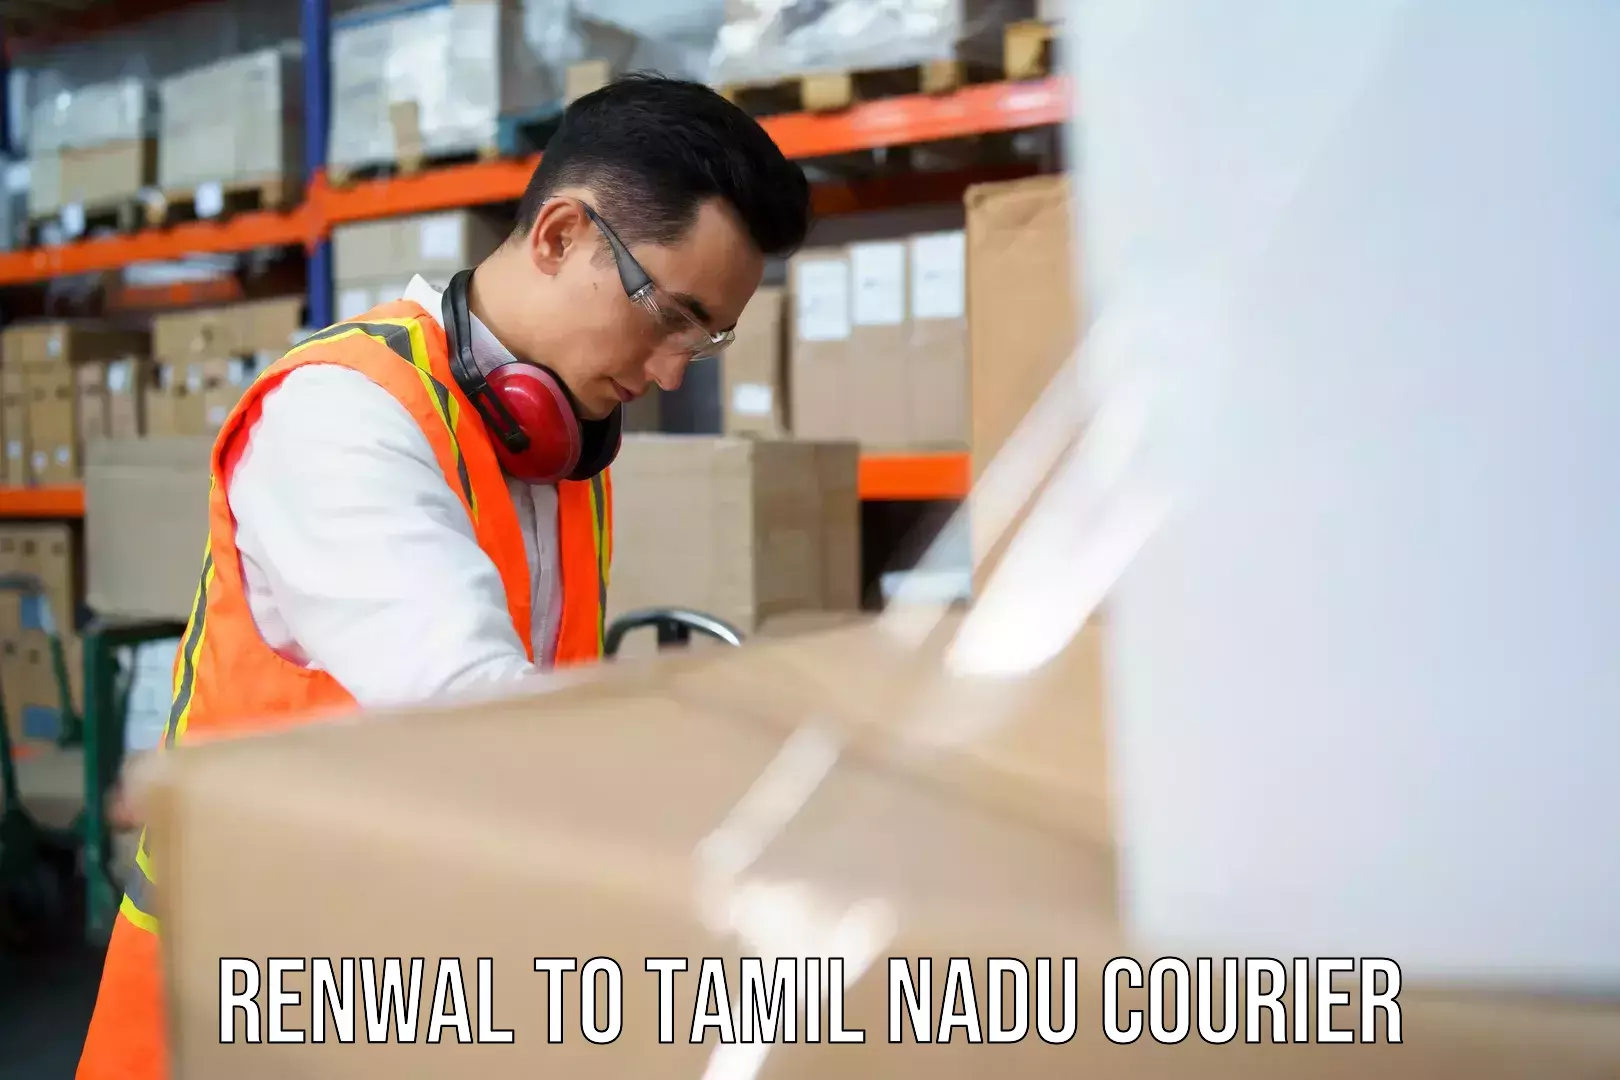 Cargo delivery service Renwal to Melur